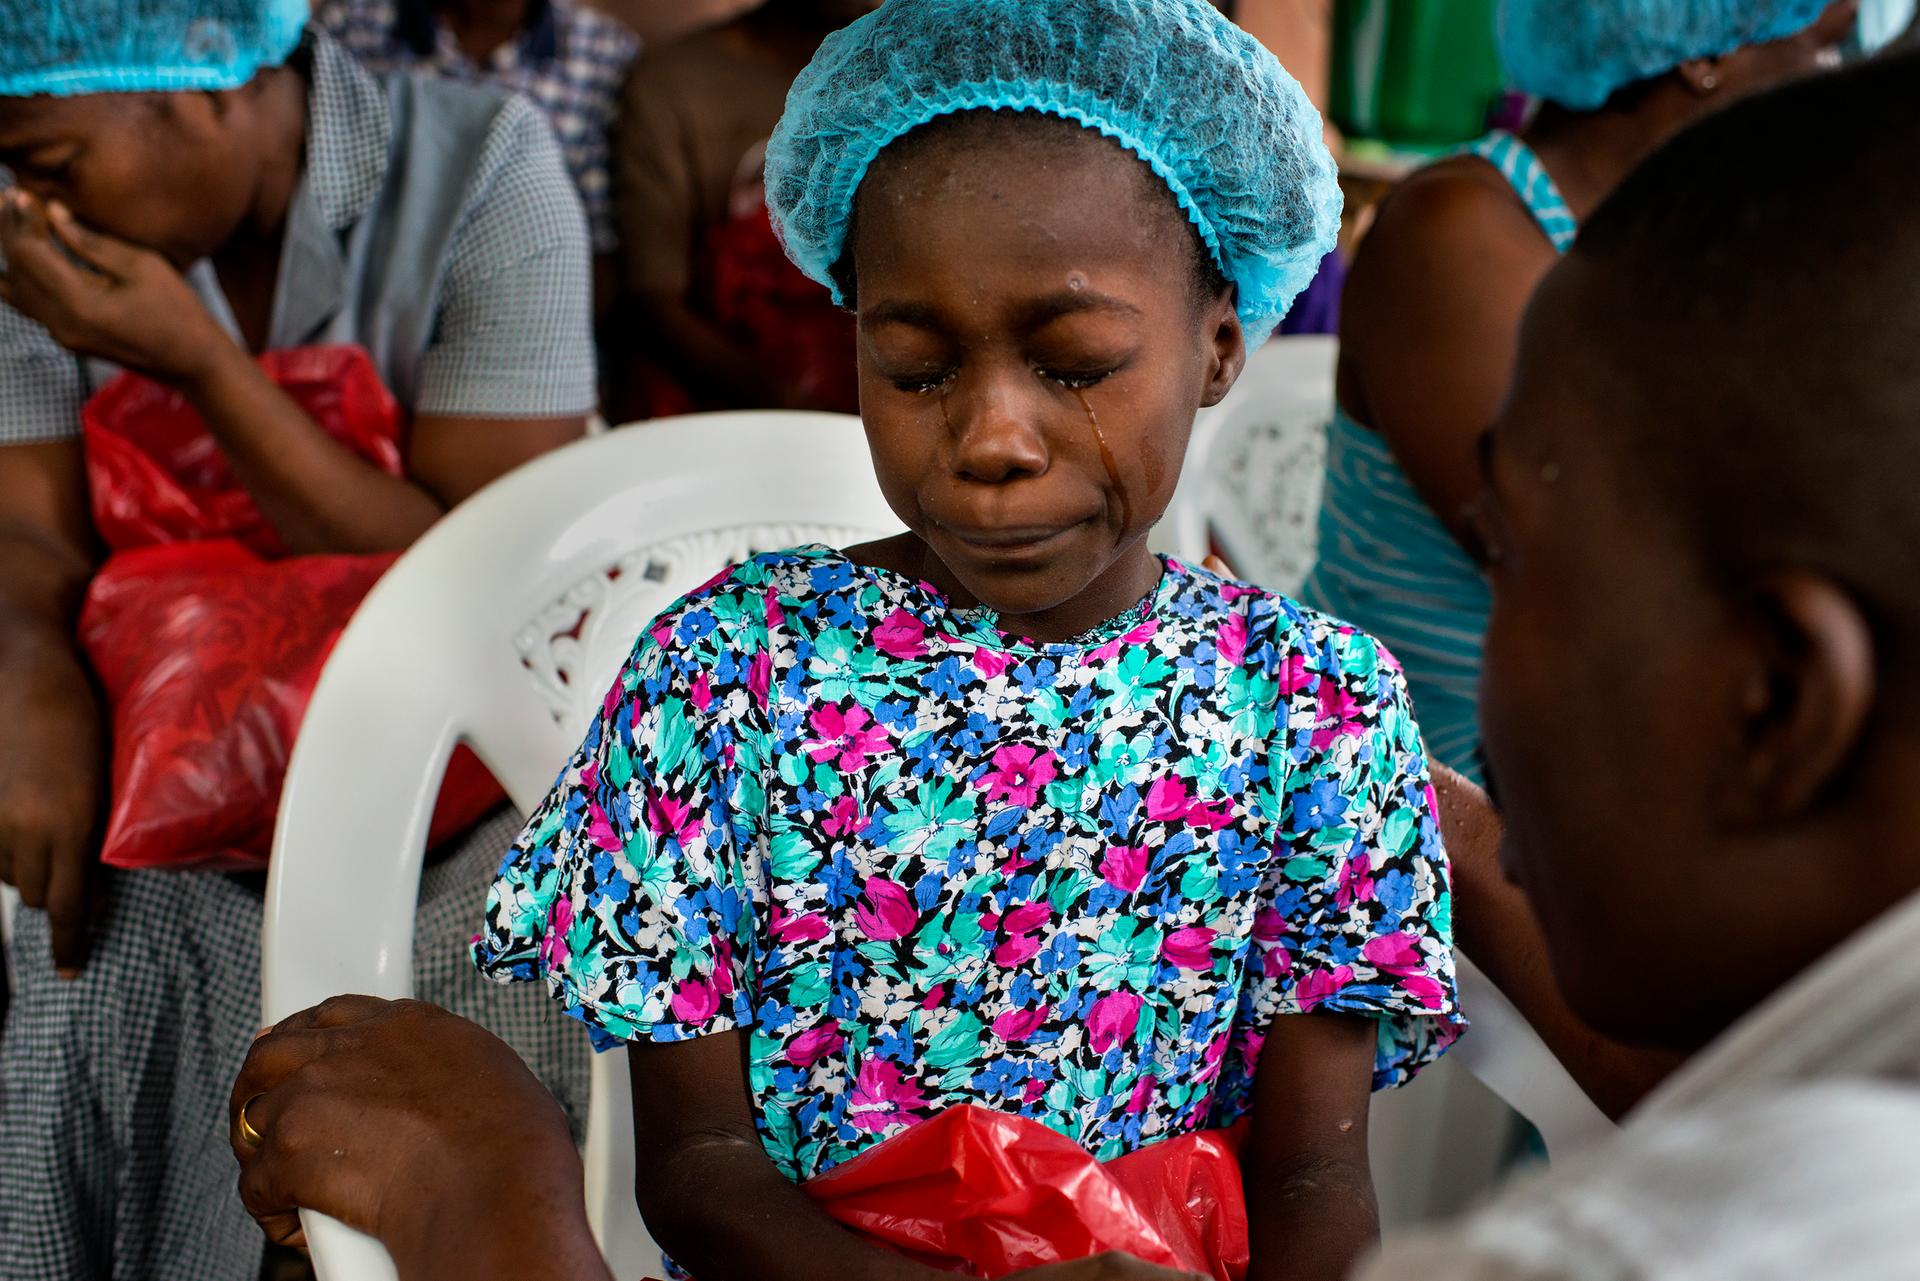 Michel du Cille's haunting photographs from the Ebola front included this one of Esther Tokpah, 11, orphaned in Monrovia, Liberia